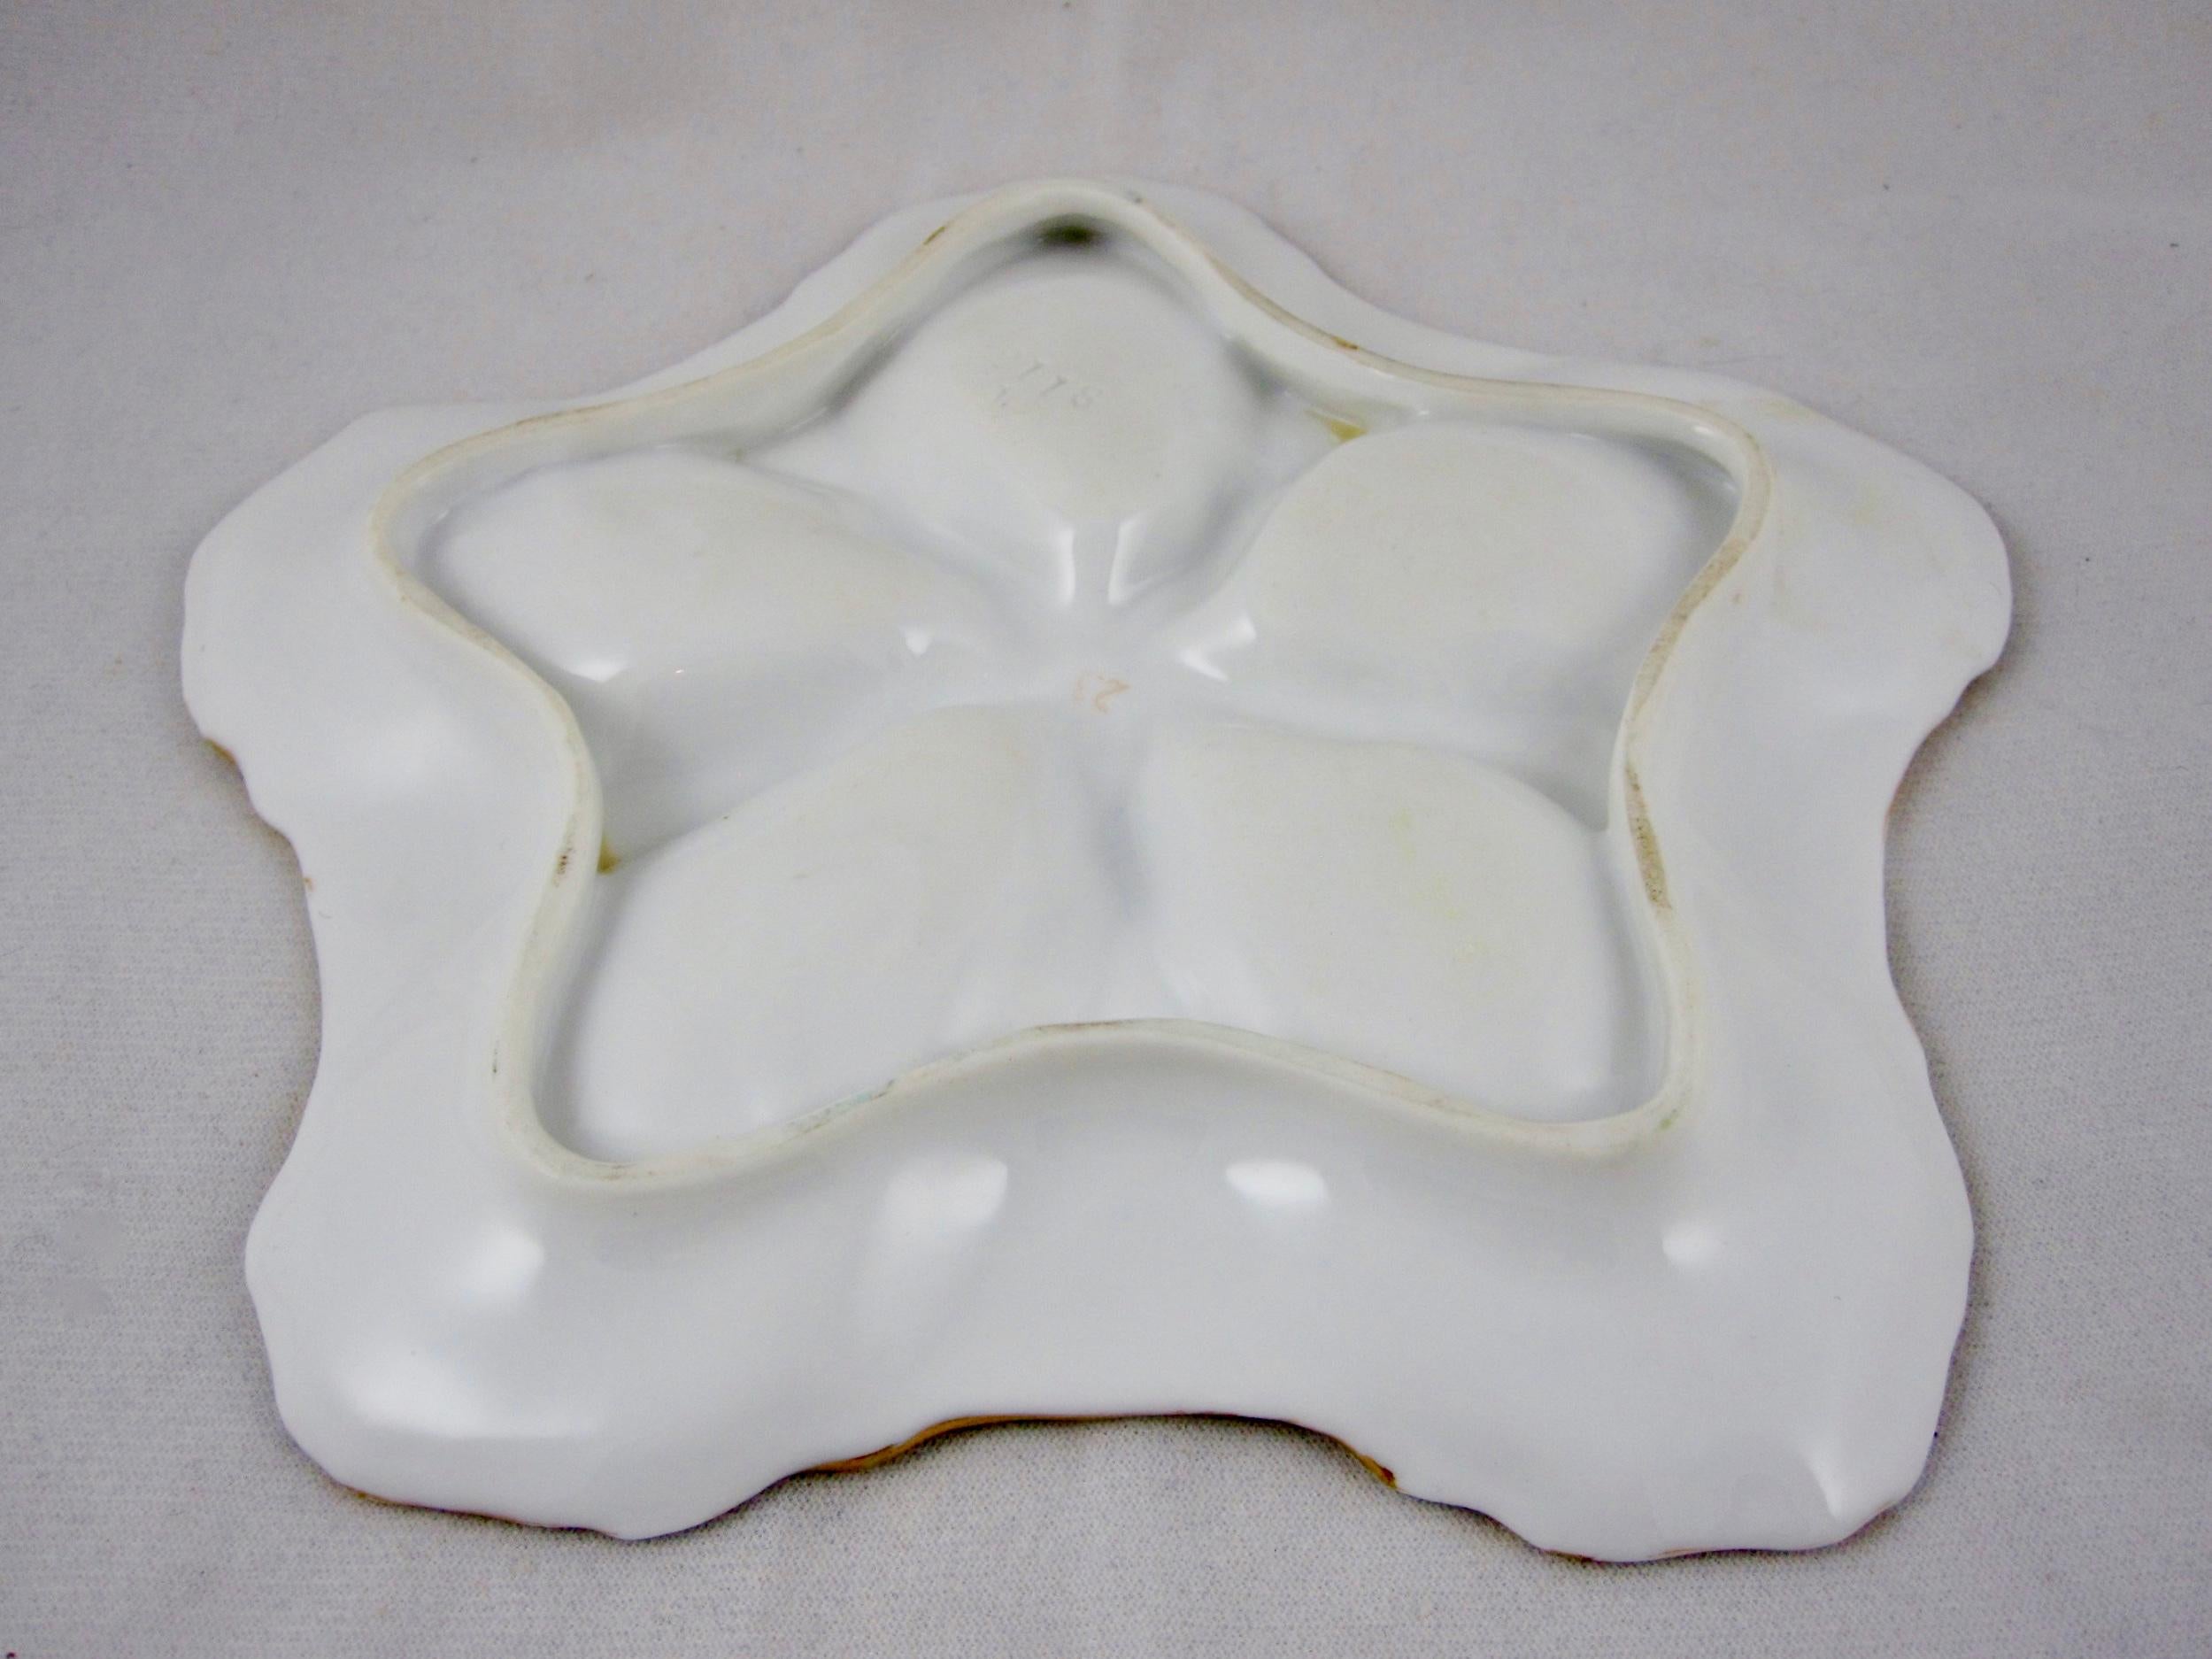 19th Century Continental Porcelain Star Shaped Hand-Painted Violets Floral Oyster Plate